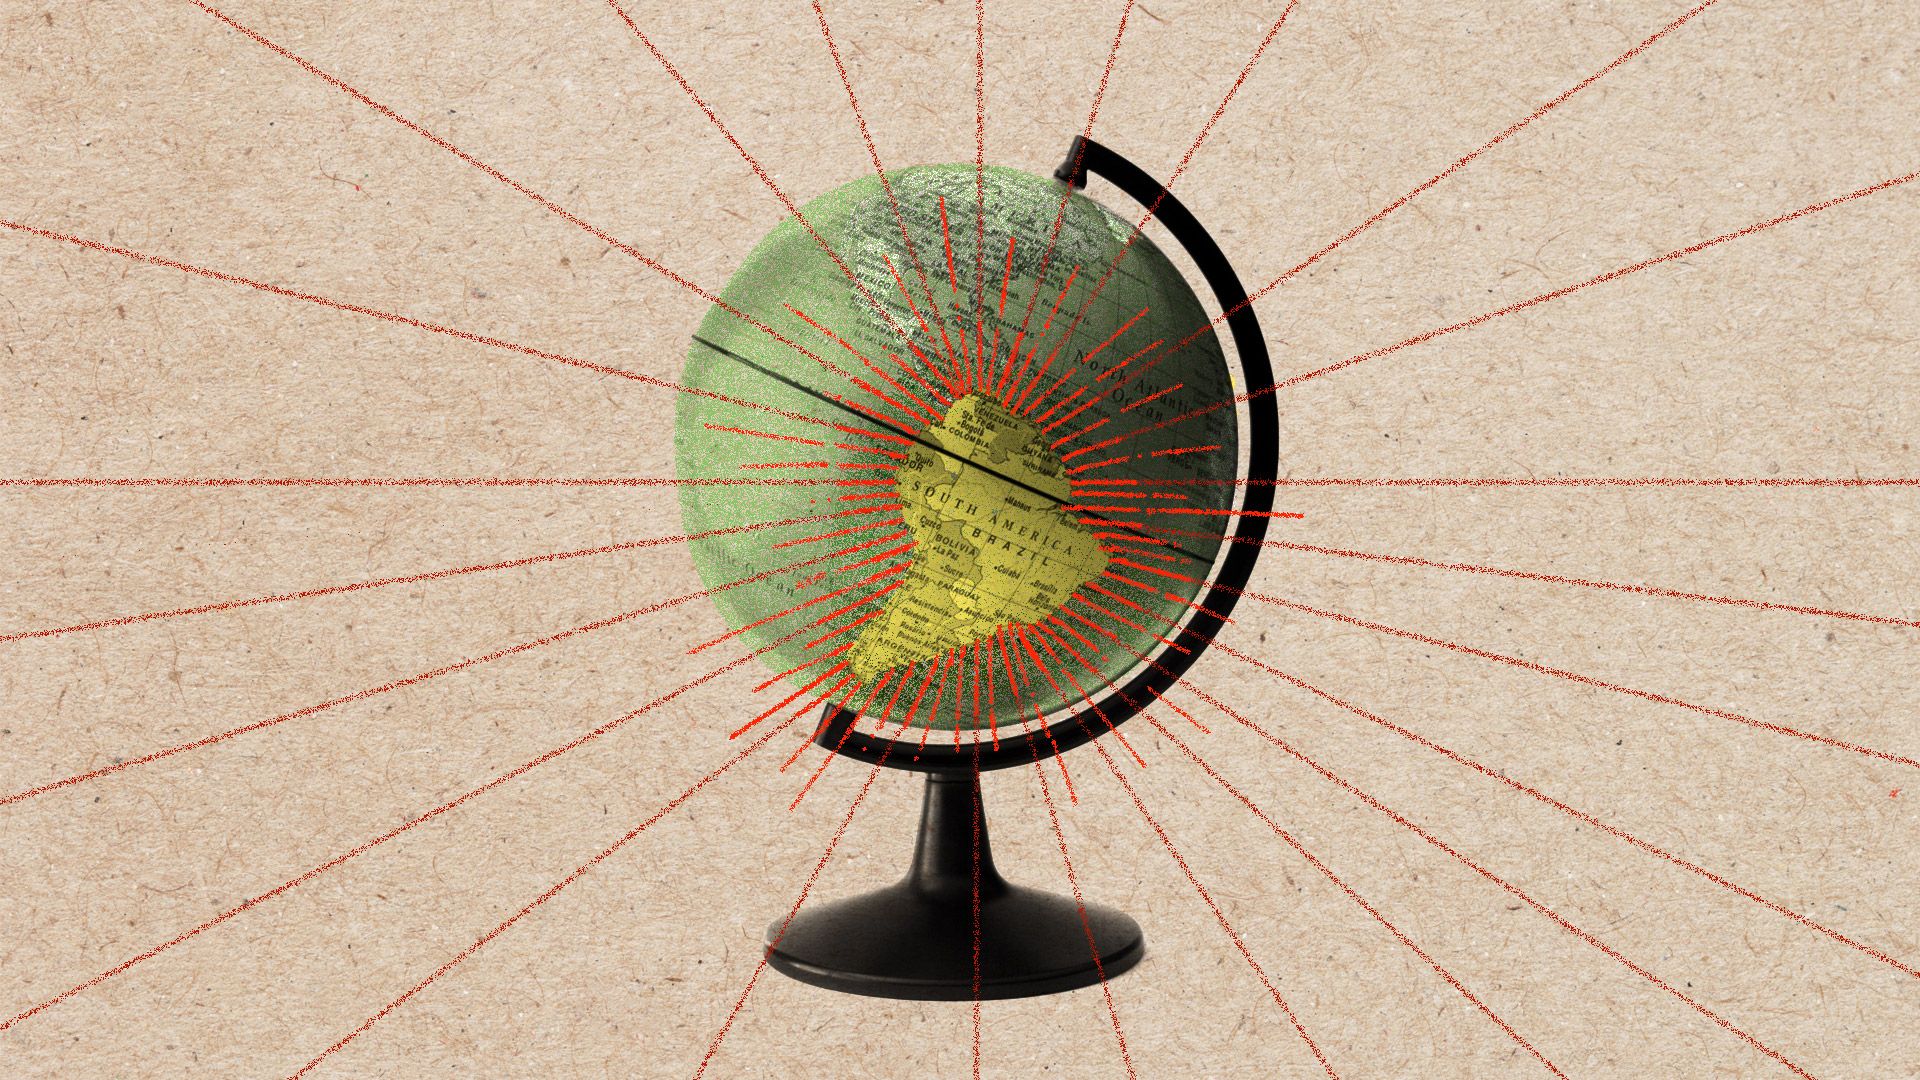 A globe map with South America radiating an abstract pattern